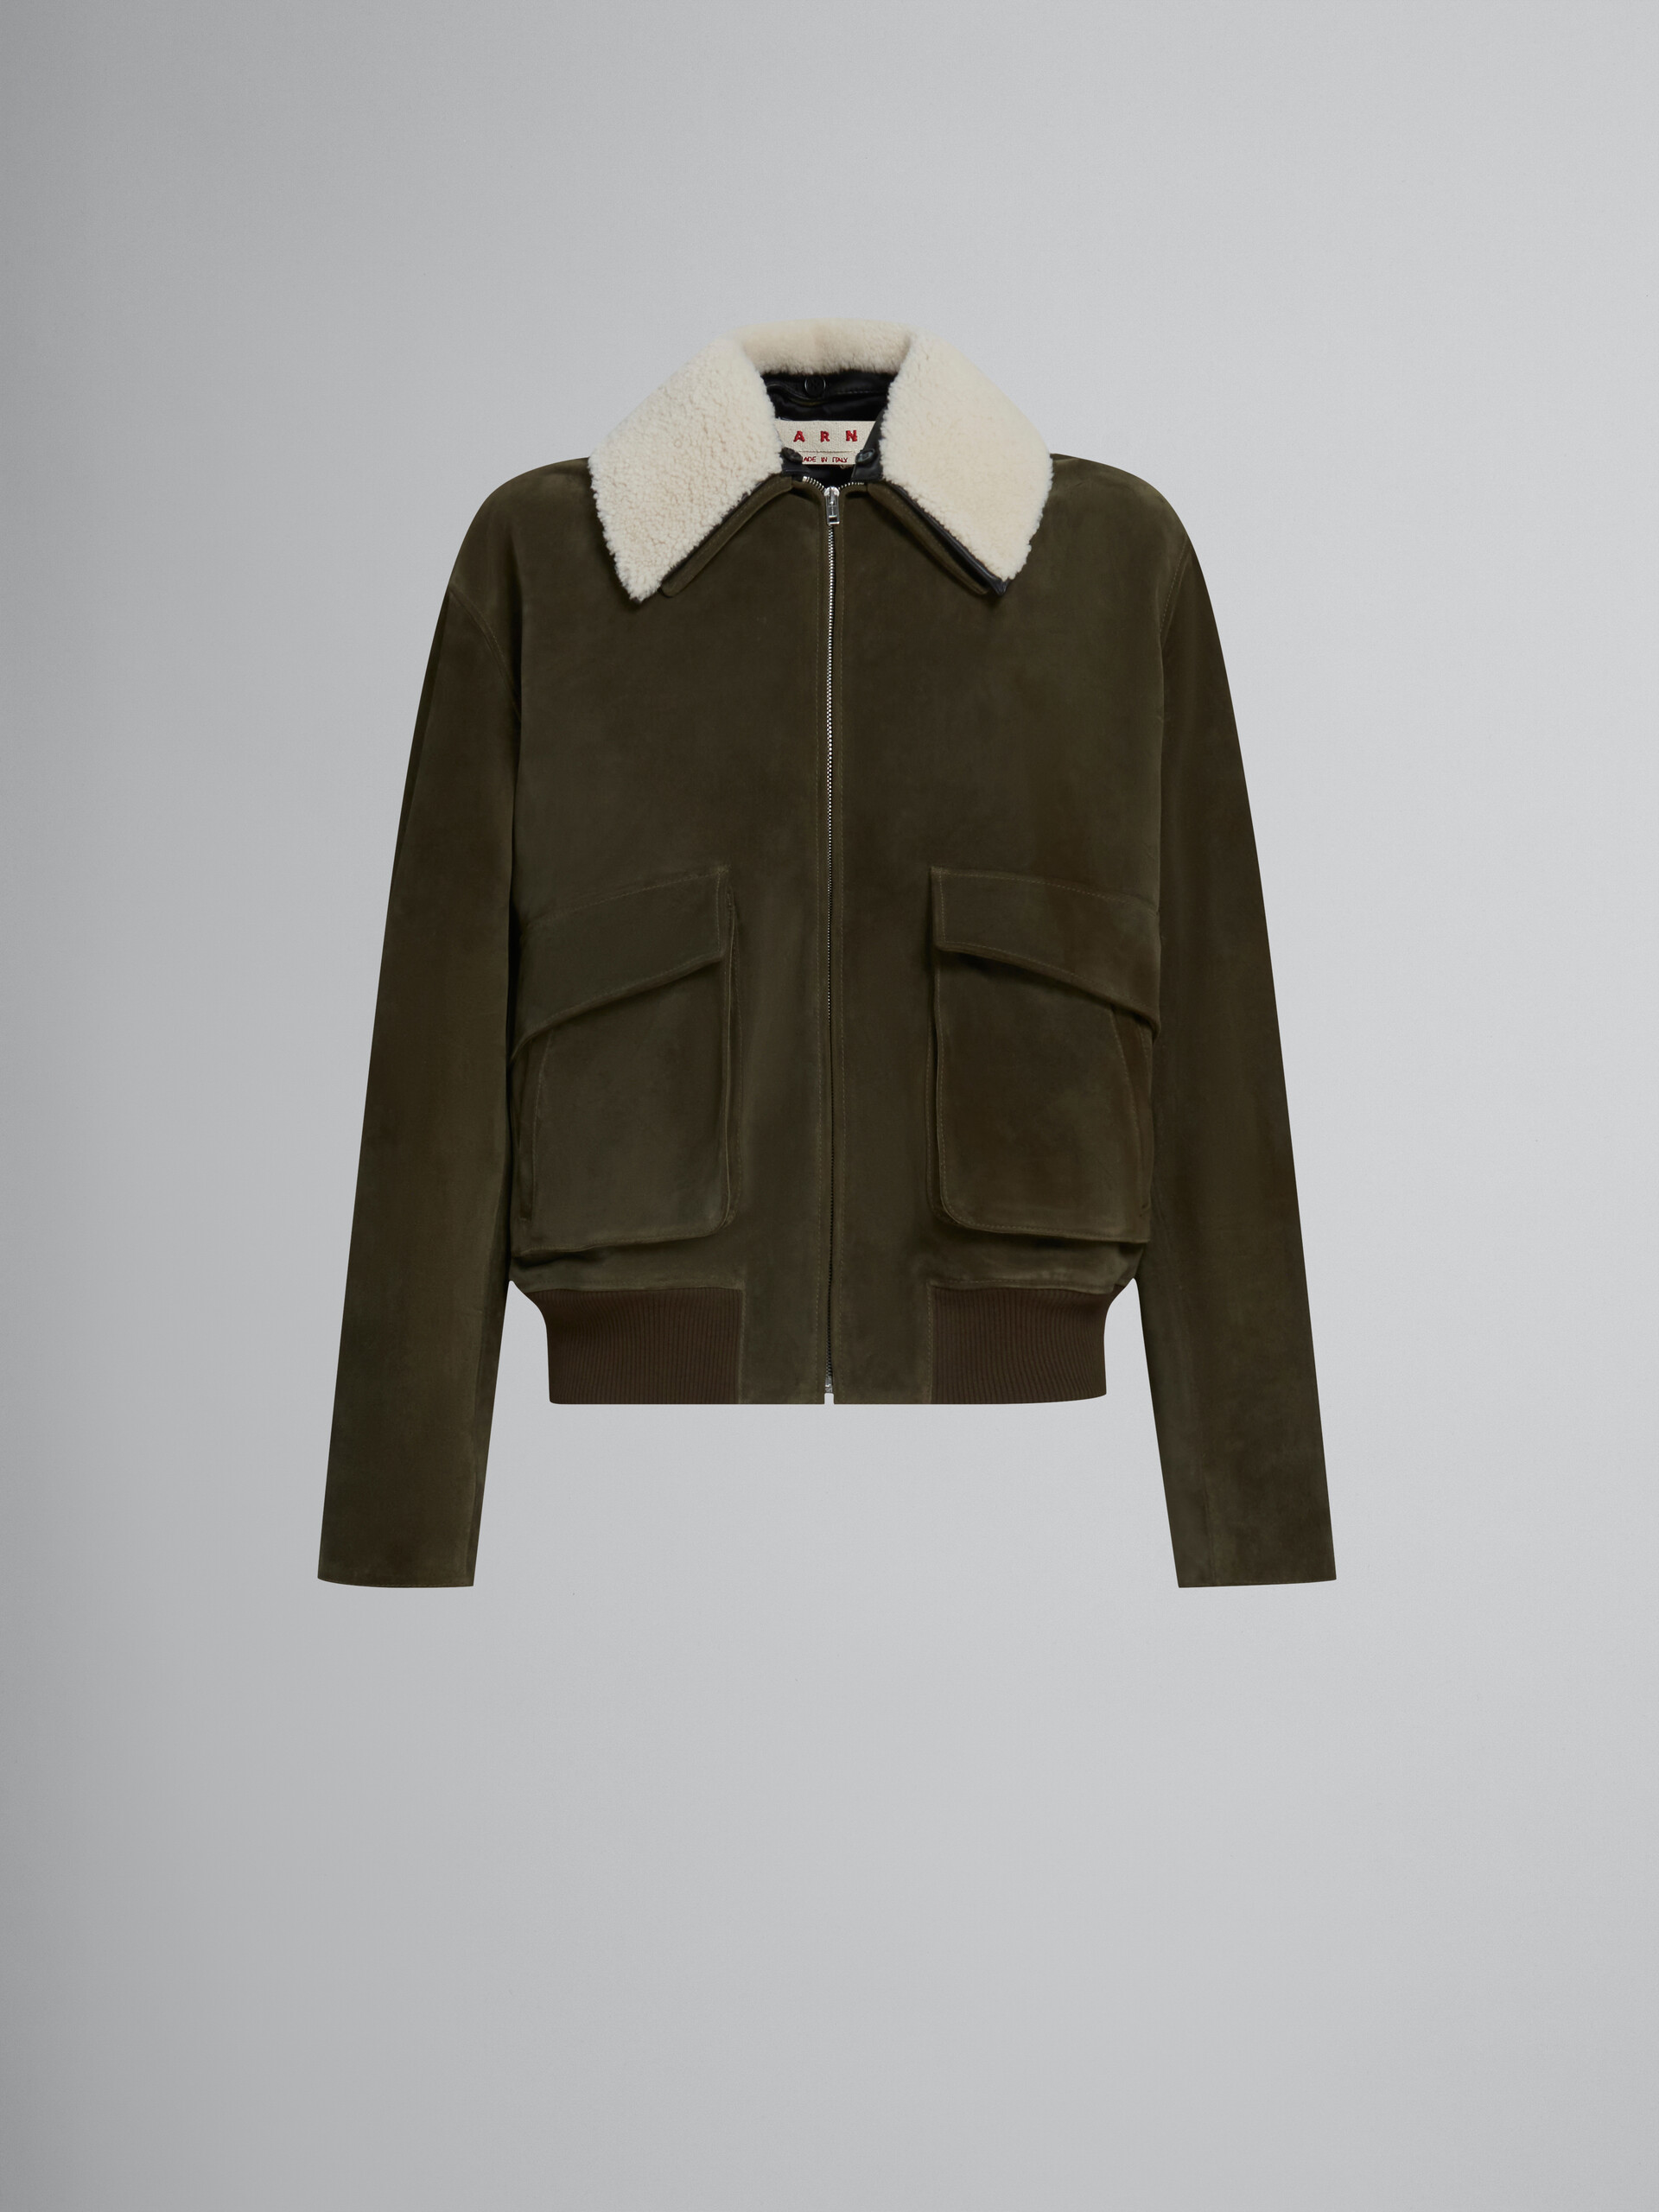 Green suede jacket with shearling collar - Jackets - Image 1